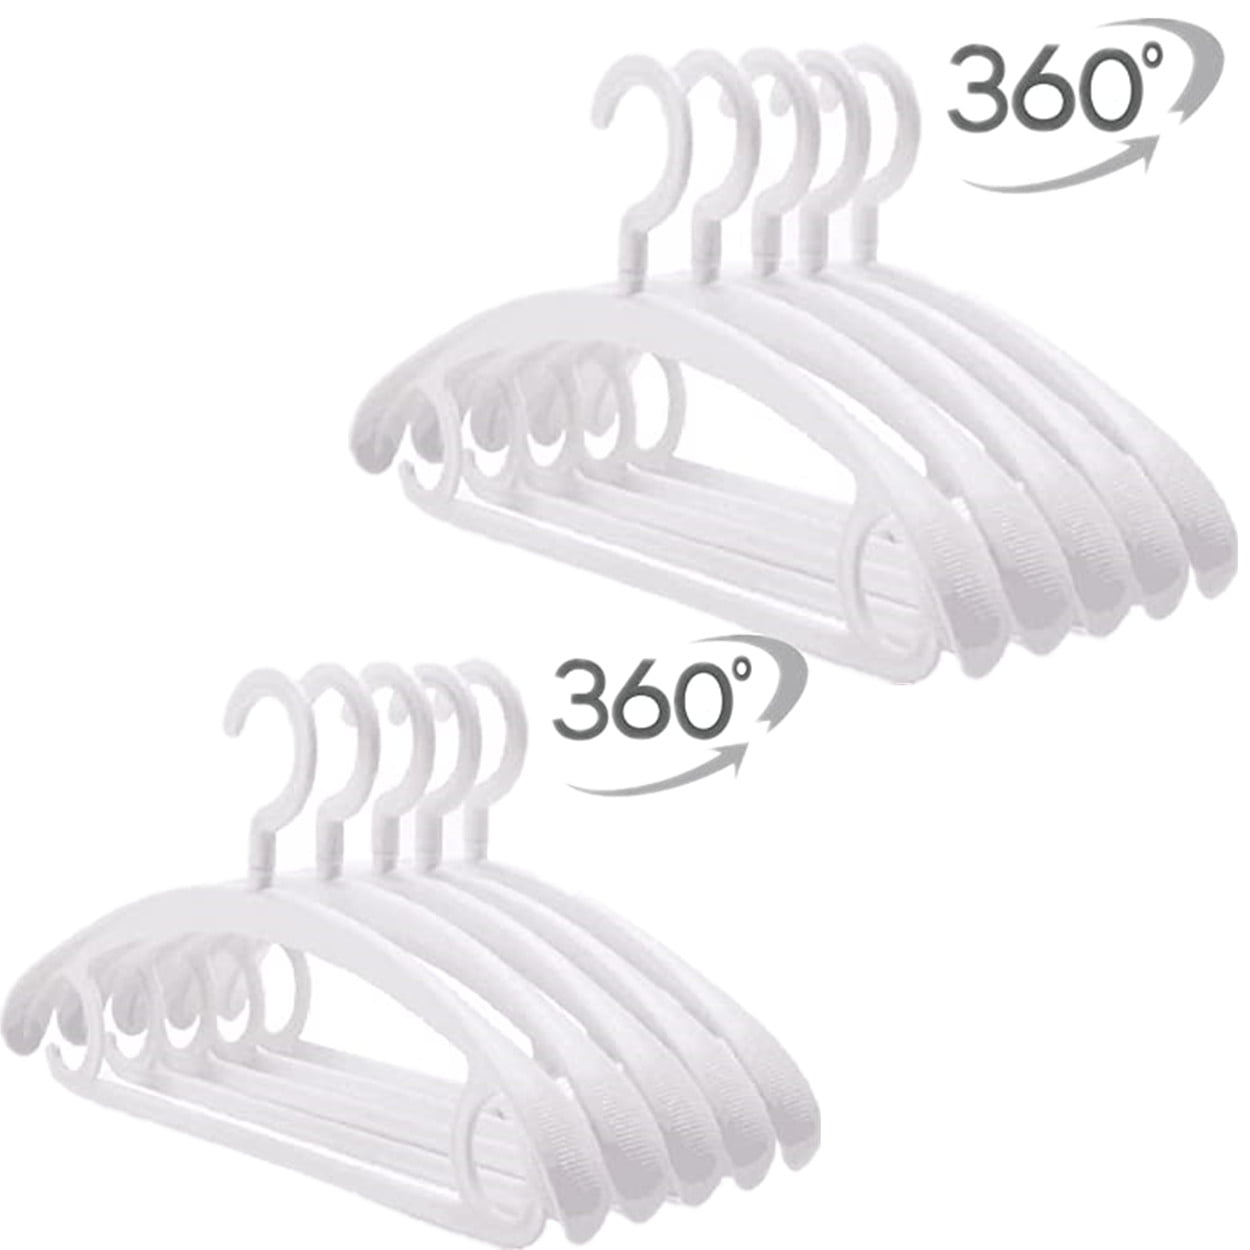 Heavy Duty Plastic Hangers, 18 Lined Garment Racks. Non-slip. Space saving,  360° swivel hook, suitable for towels, clothes, etc. Green White